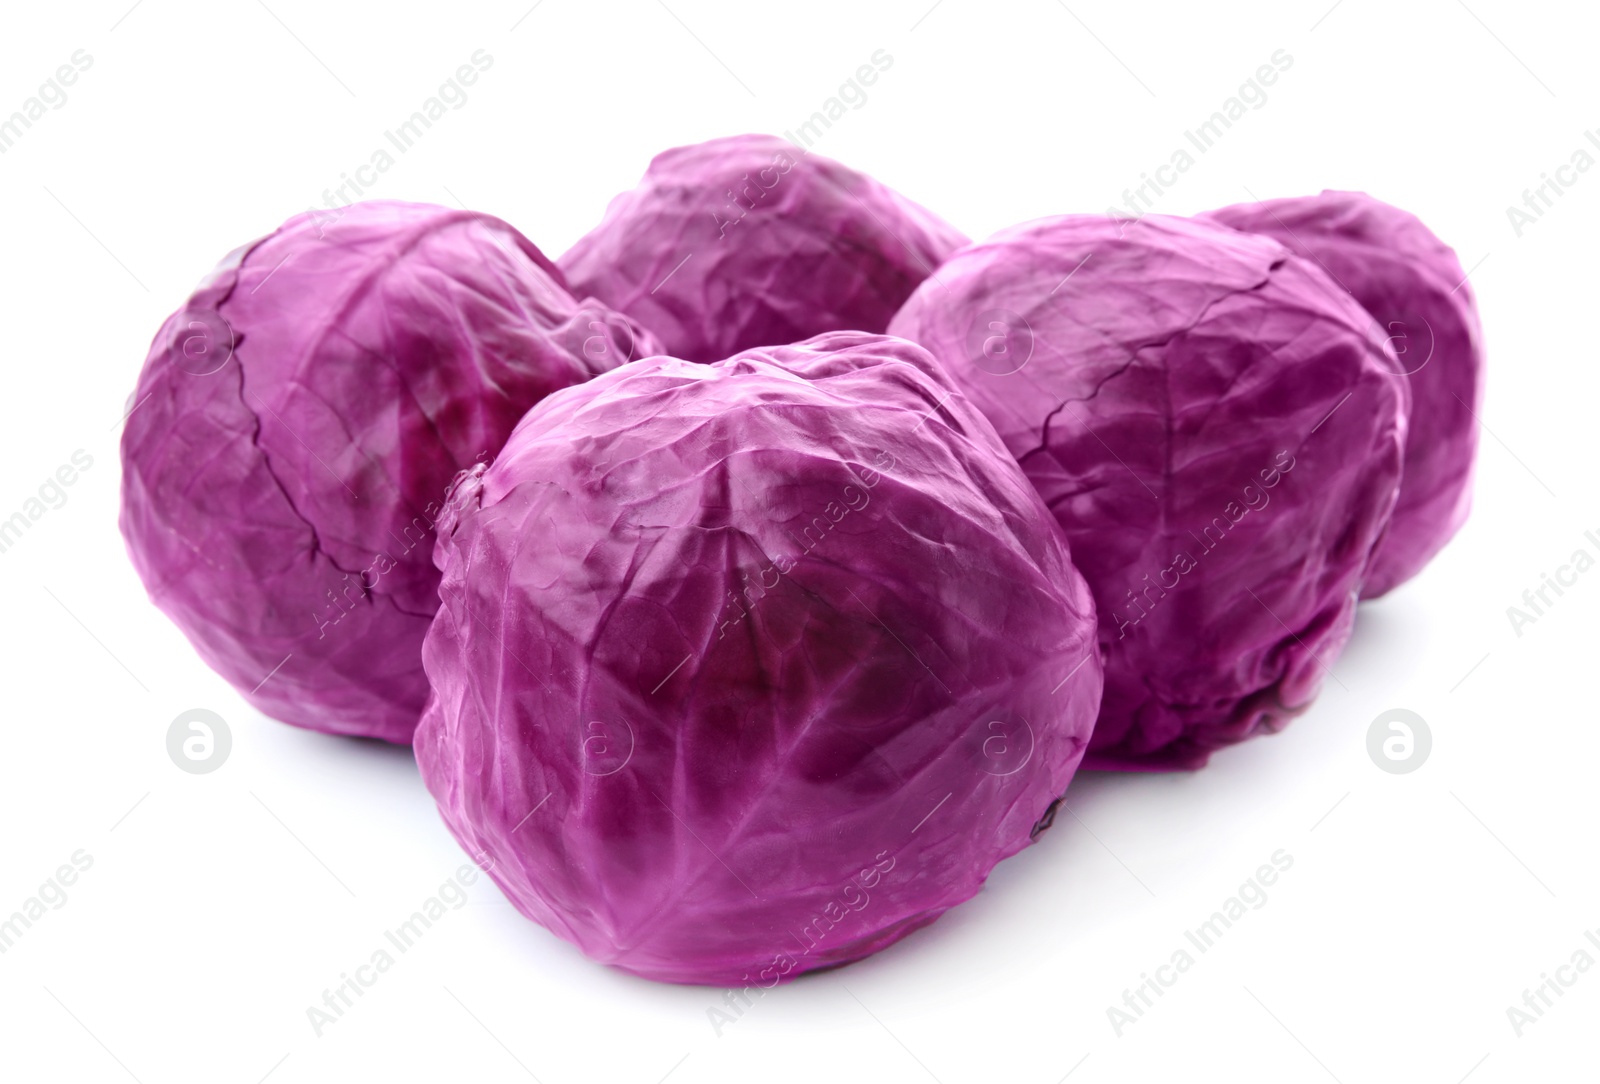 Photo of Whole ripe red cabbages on white background